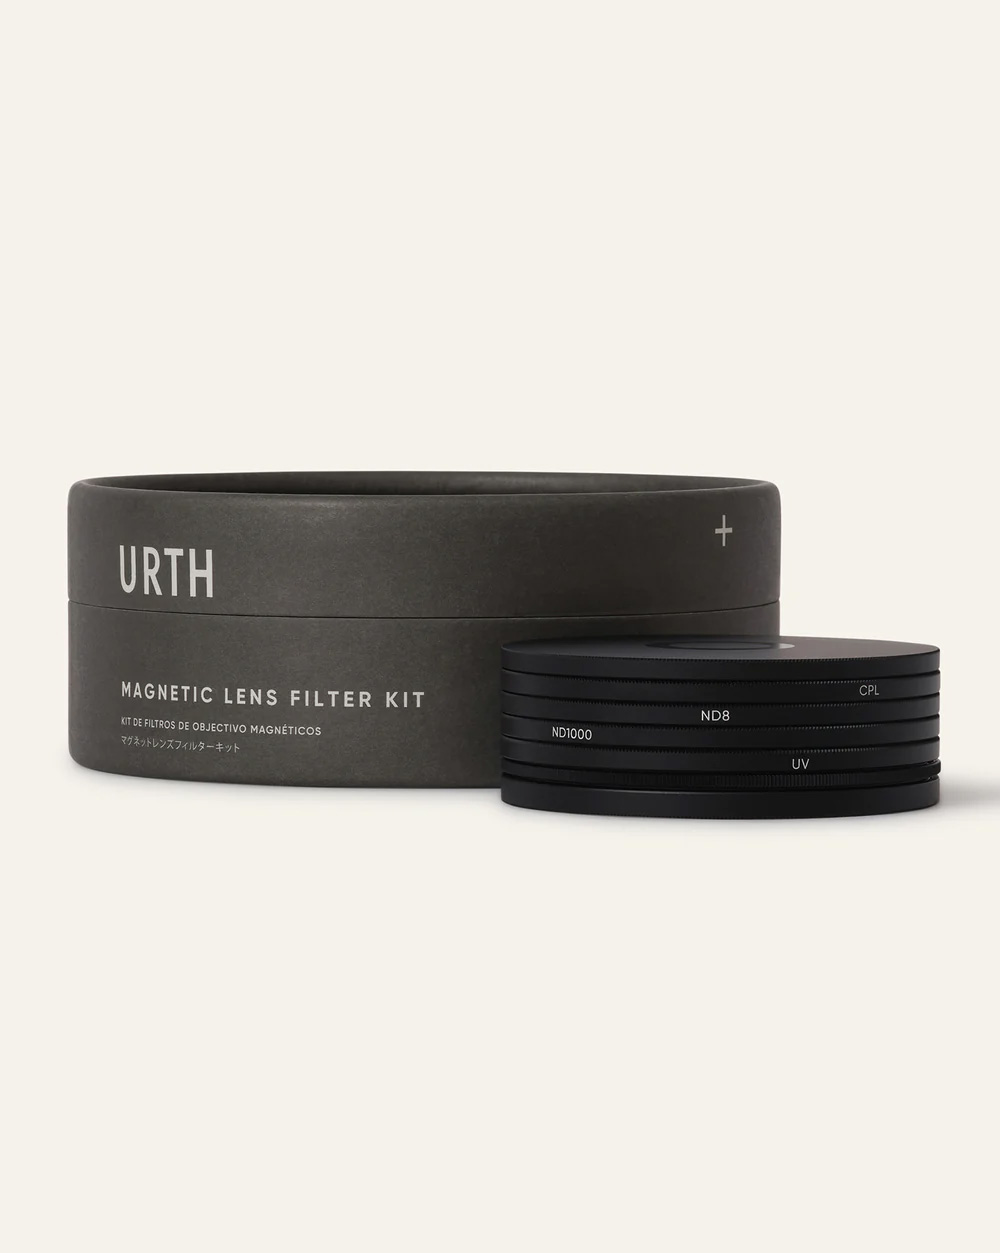 Urth Magnetic Essentials Filter Kit Plus+ (82mm) 4 Filter Kit (UV, CPL, ND8 and ND1000)